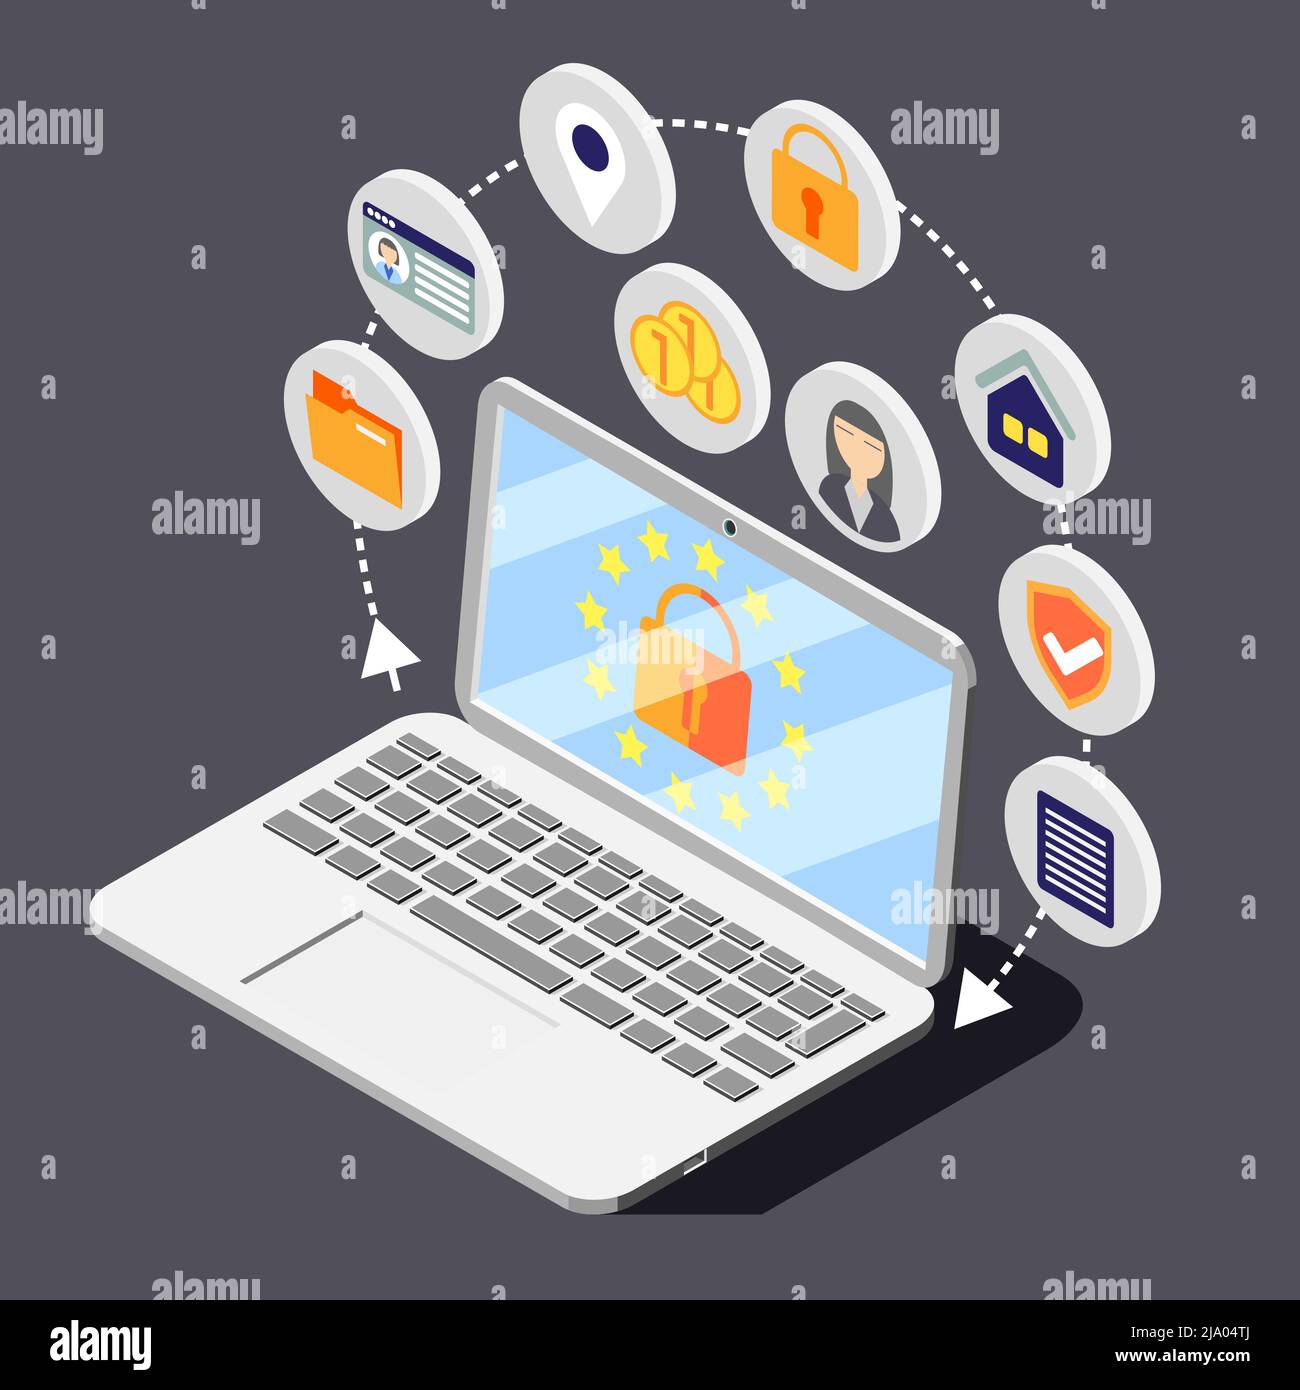 Personal data protection gdpr isometric background composition with image of laptop surrounded by circle pictogram icons vector illustration Stock Vector